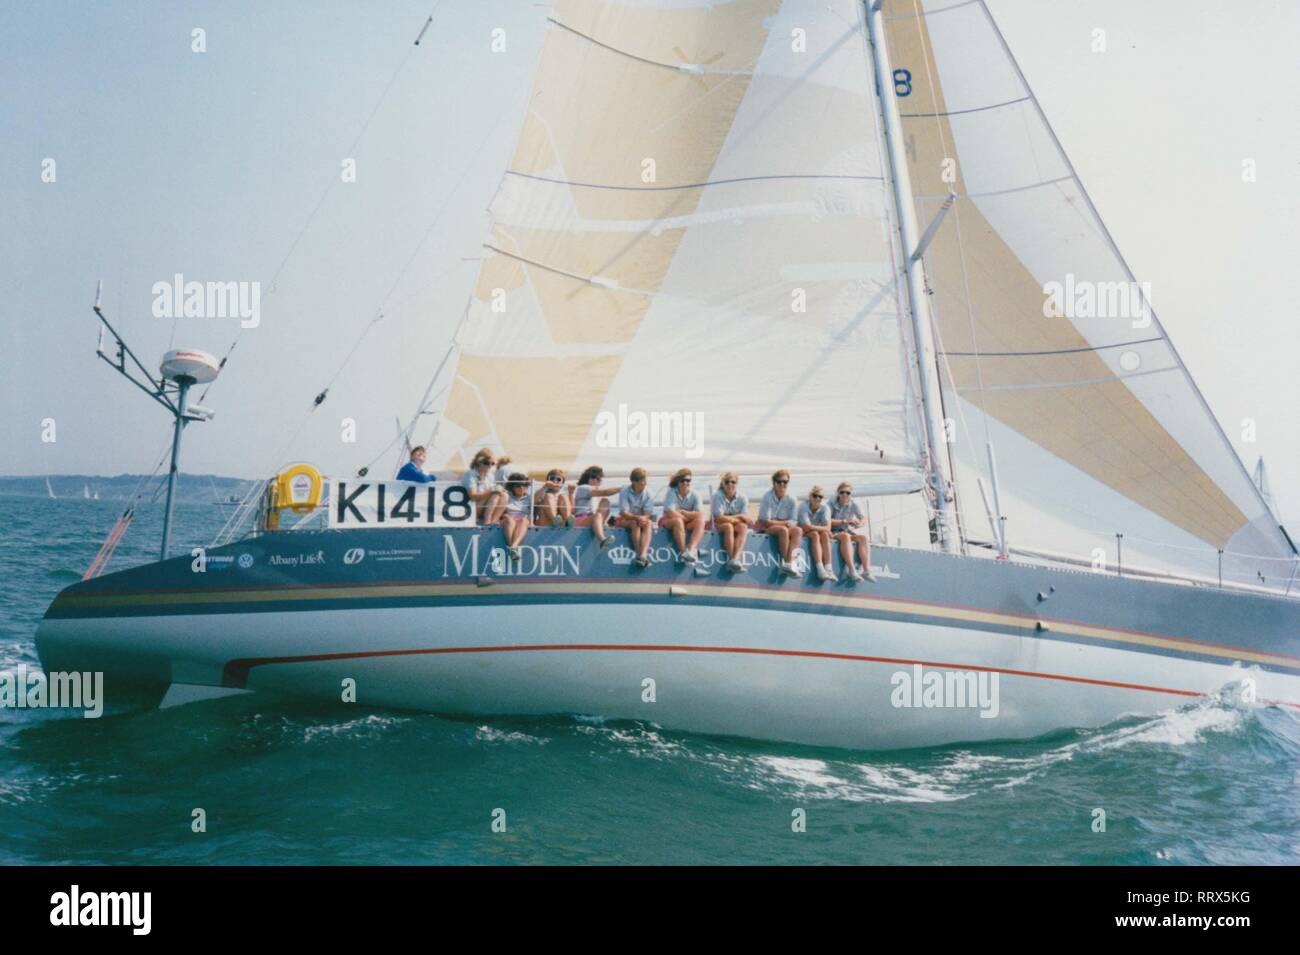 RELEASE DATE: June 28, 2019 TITLE: Maiden STUDIO: Sony Pictures Classics DIRECTOR: Alex Holmes PLOT: The story of Tracy Edwards, a 24-year-old cook on charter boats, who became the skipper of the first ever all-female crew to enter the Whitbread Round the World Race in 1989. STARRING: Tracy Edwards, Mikaela von Koskull, Michele Paret (back turned), Jo Gooding, Claire Warren, Angela Heath, Sarah Davies, Amanda Swan Neal, Dawn Riley, Sally Hunter, Jeni Mundy, Tanja Viss. (Credit Image: © Sony Pictures Classics/Entertainment Pictures) Stock Photo